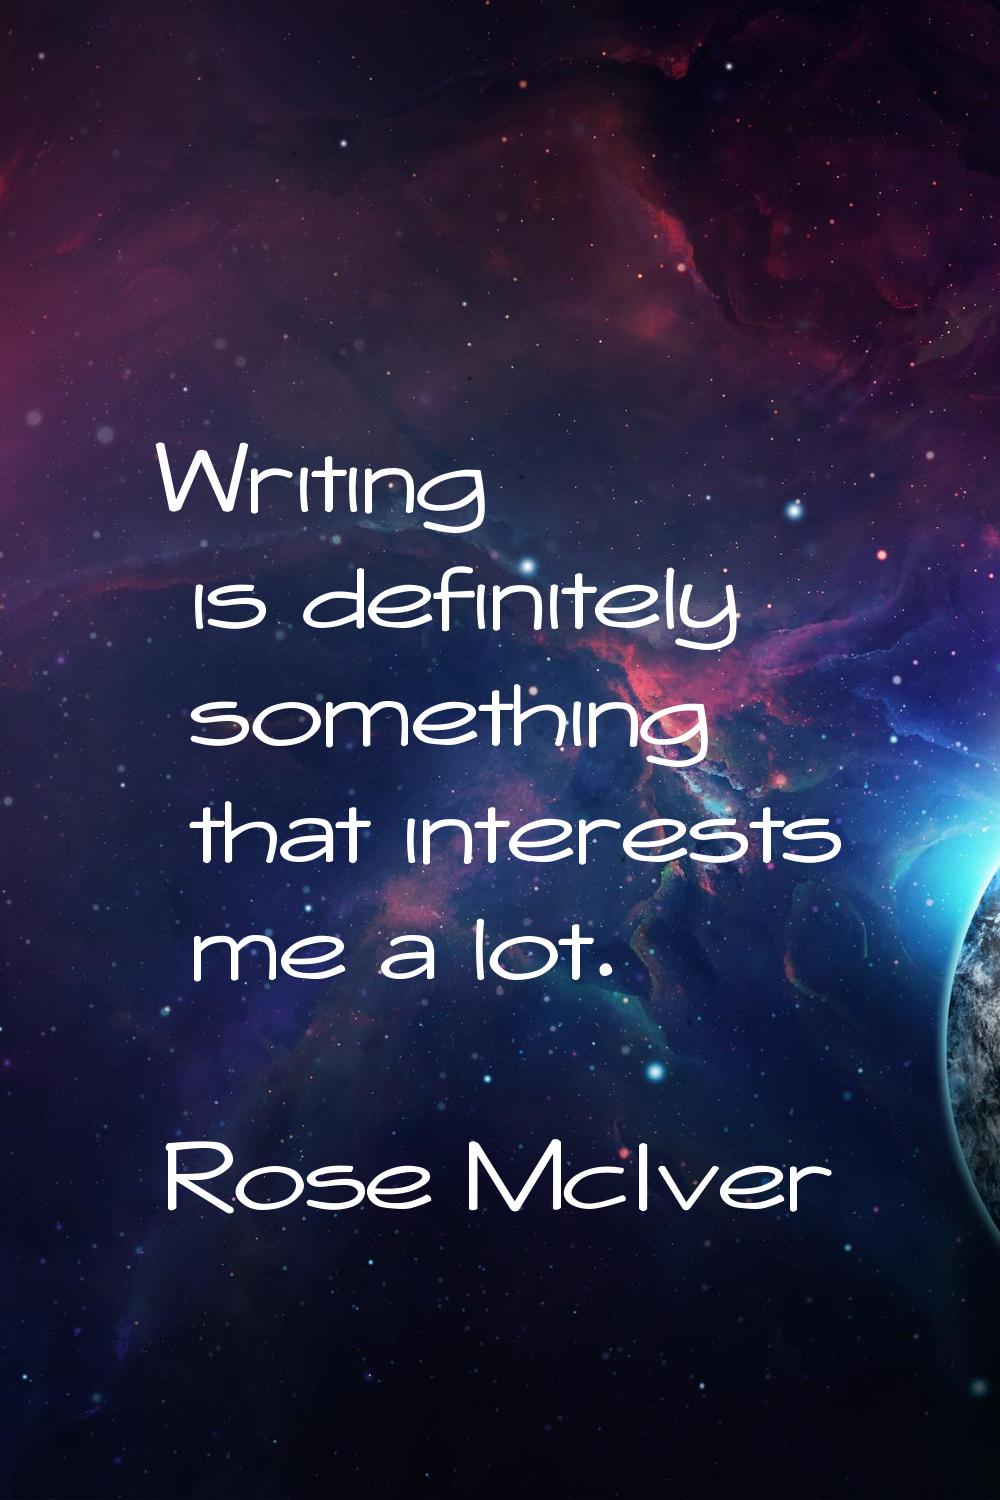 Writing is definitely something that interests me a lot.